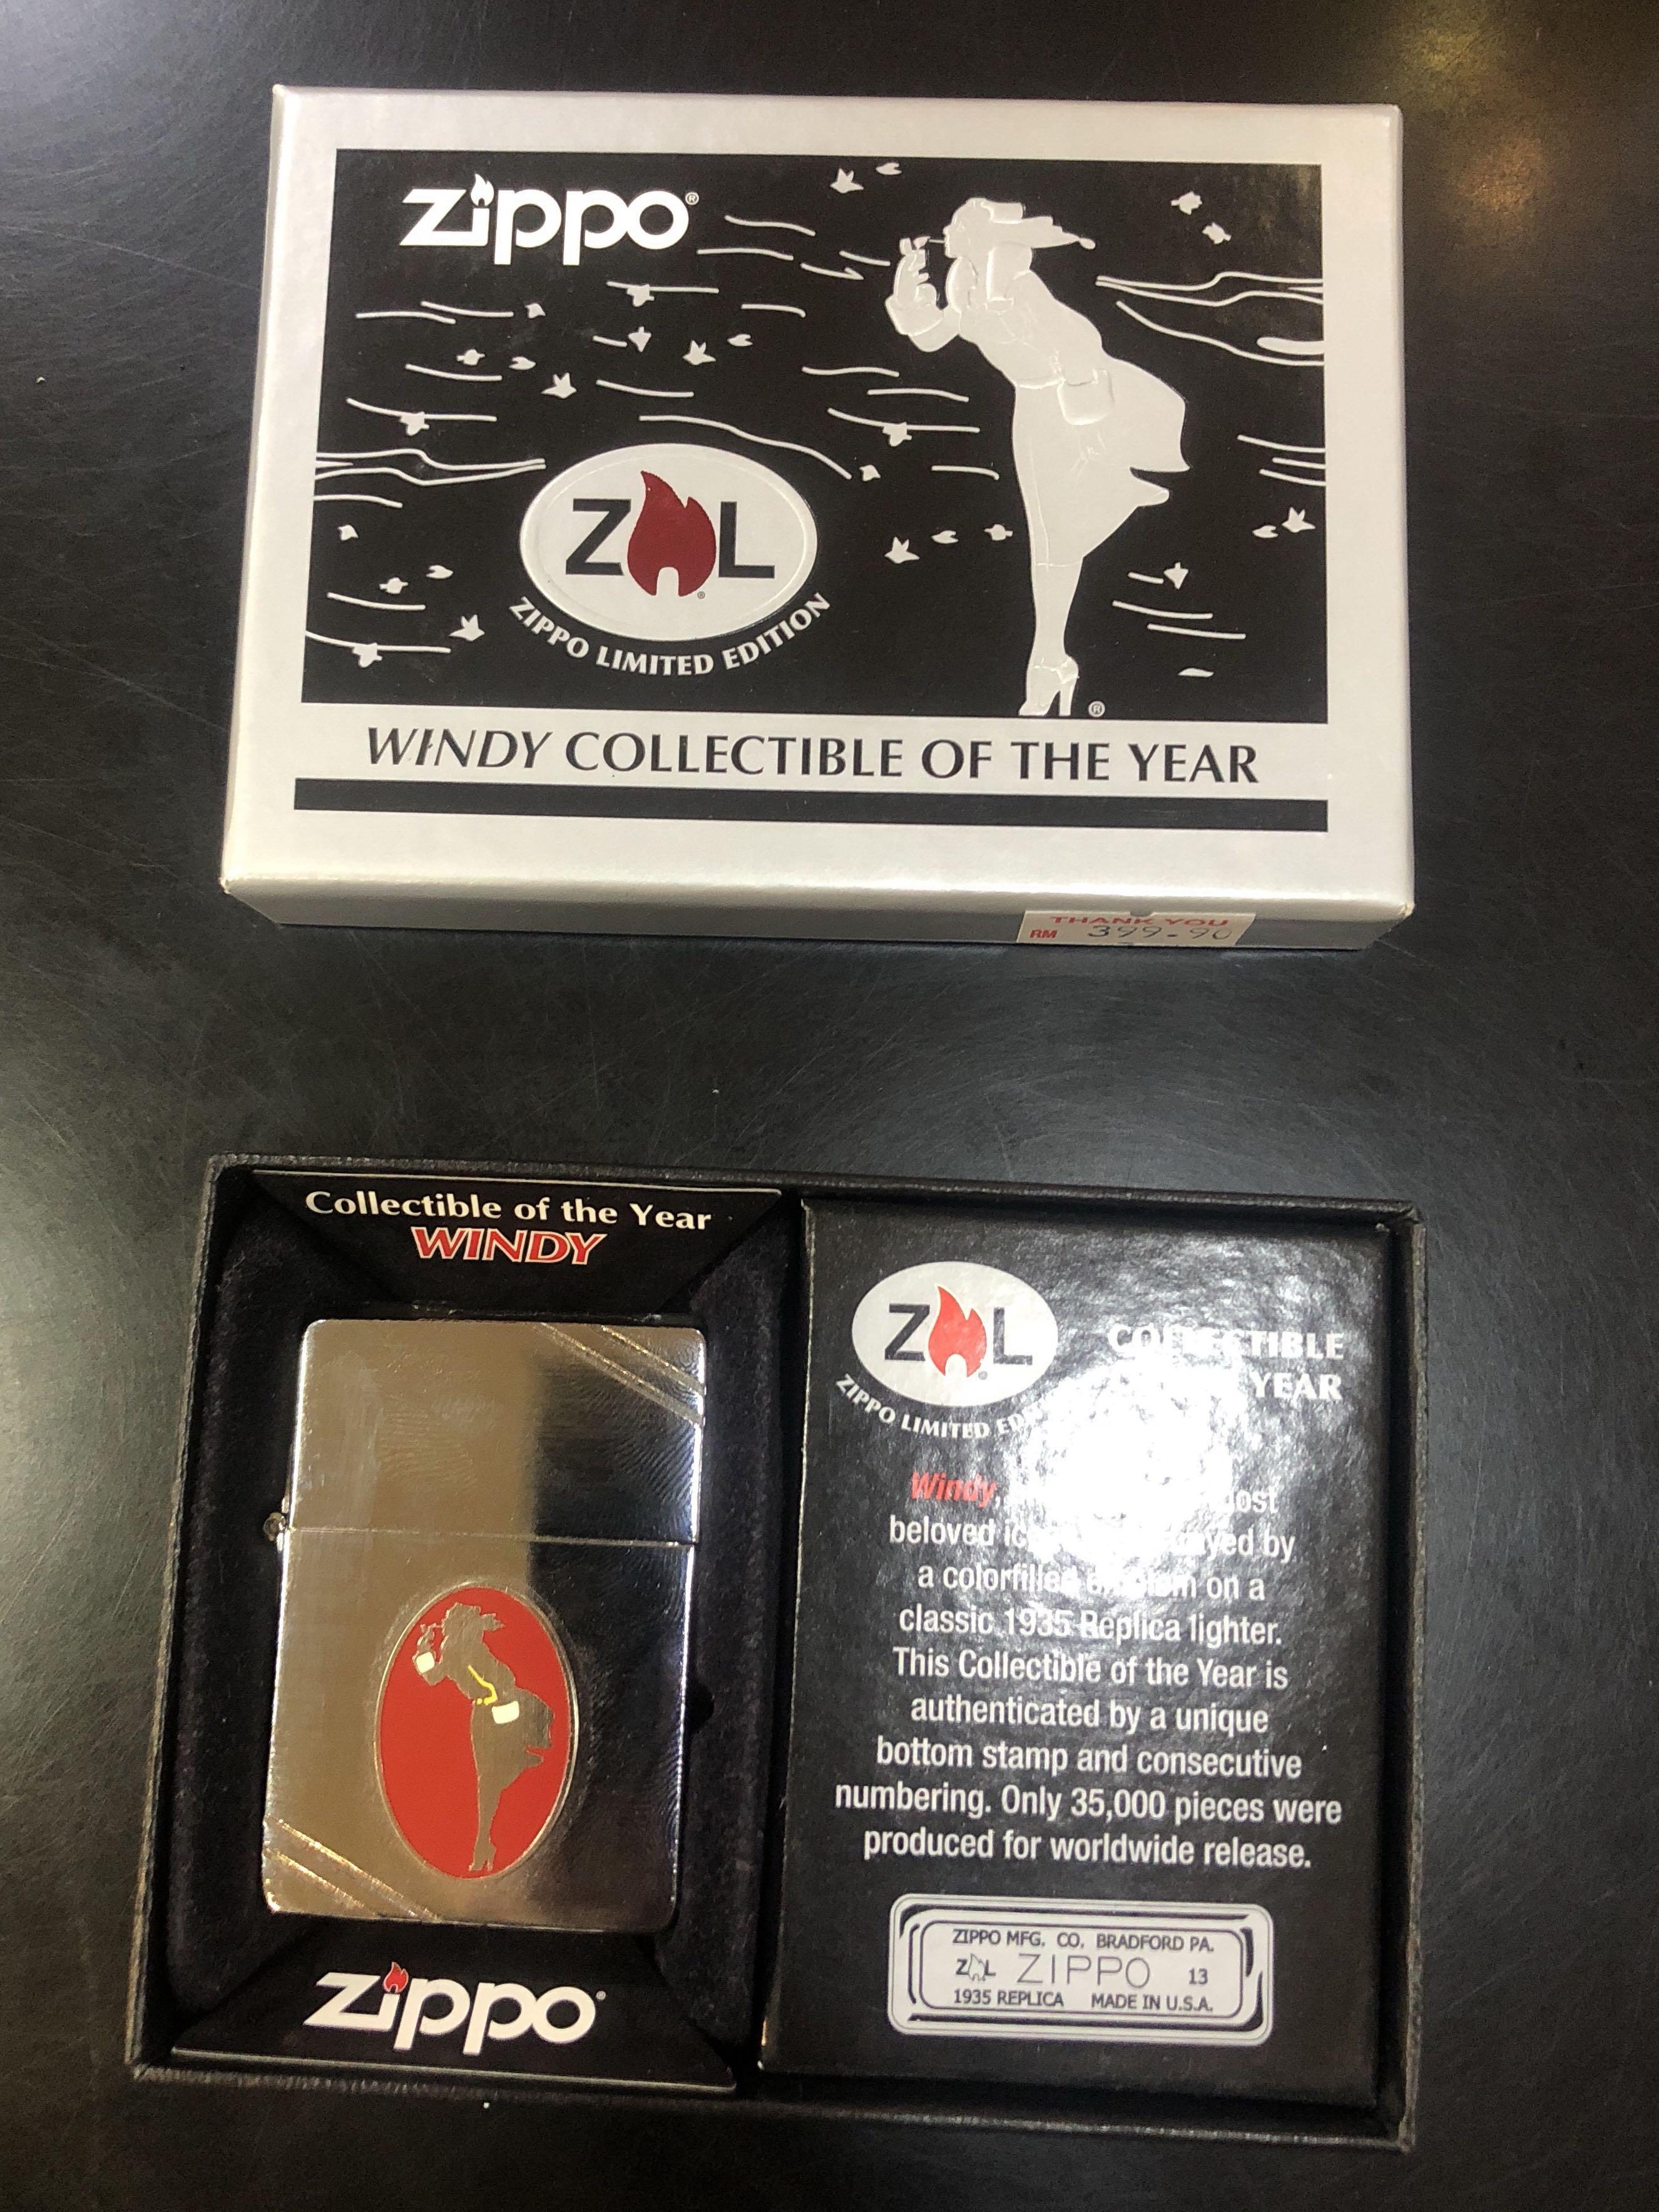 ZIPPO '13 WINDY COLLECTIBLE OF THE YEARシリアルナンバー - タバコグッズ